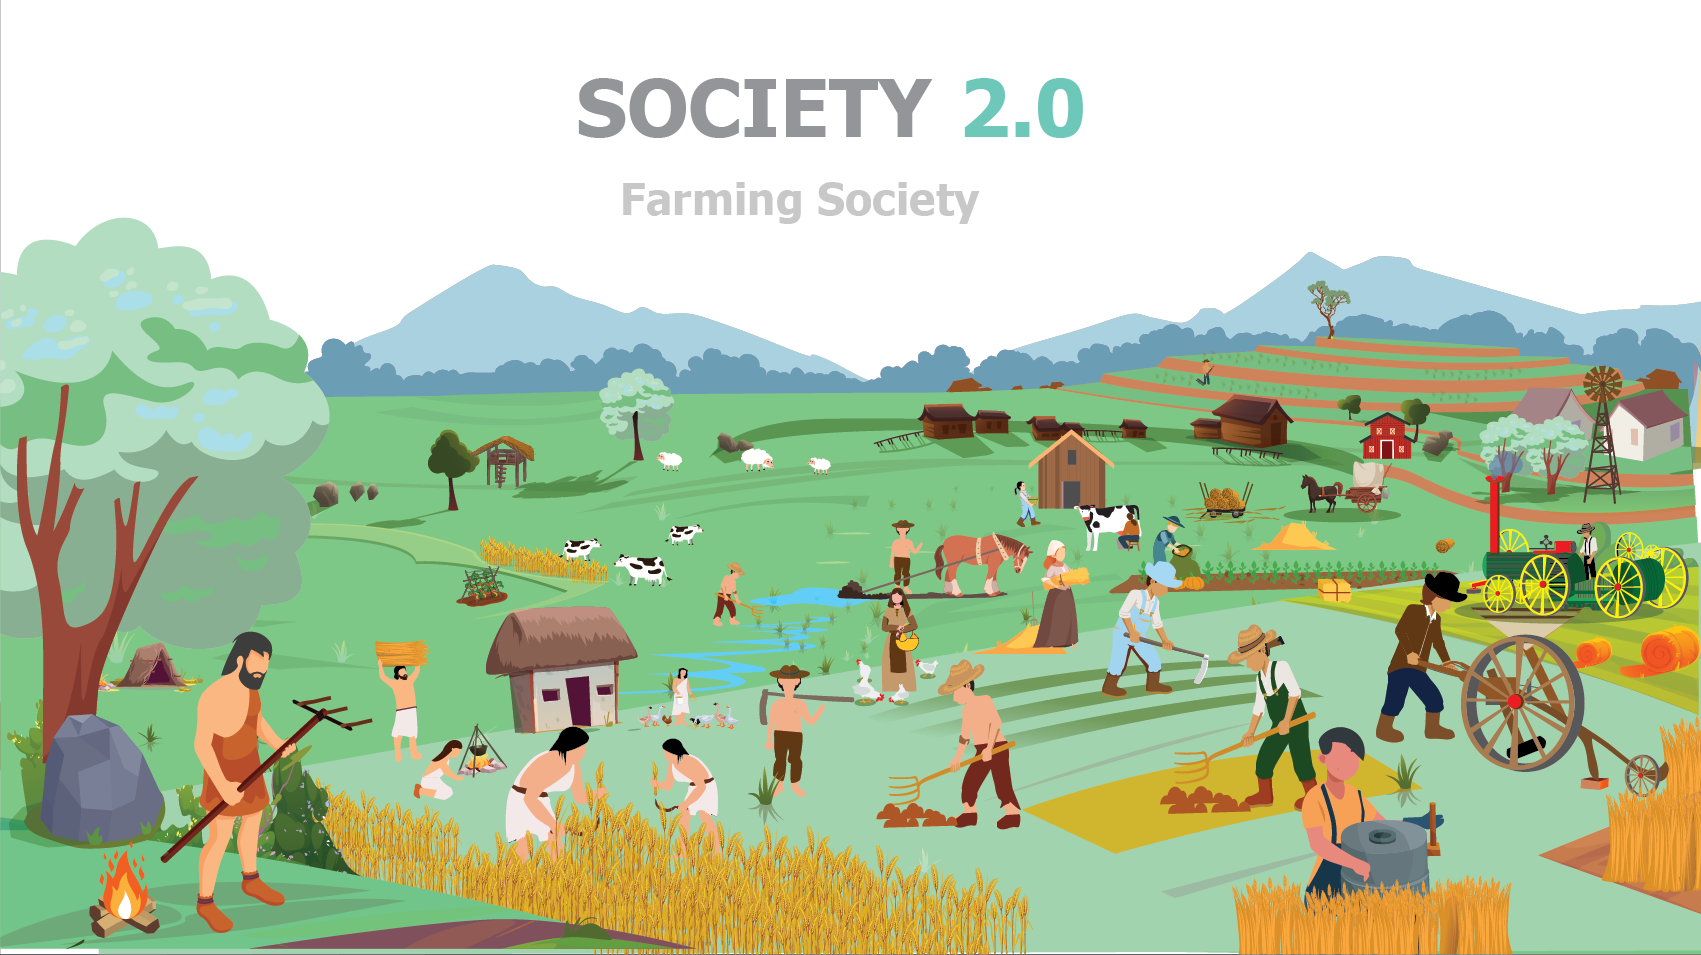 The agrarian society